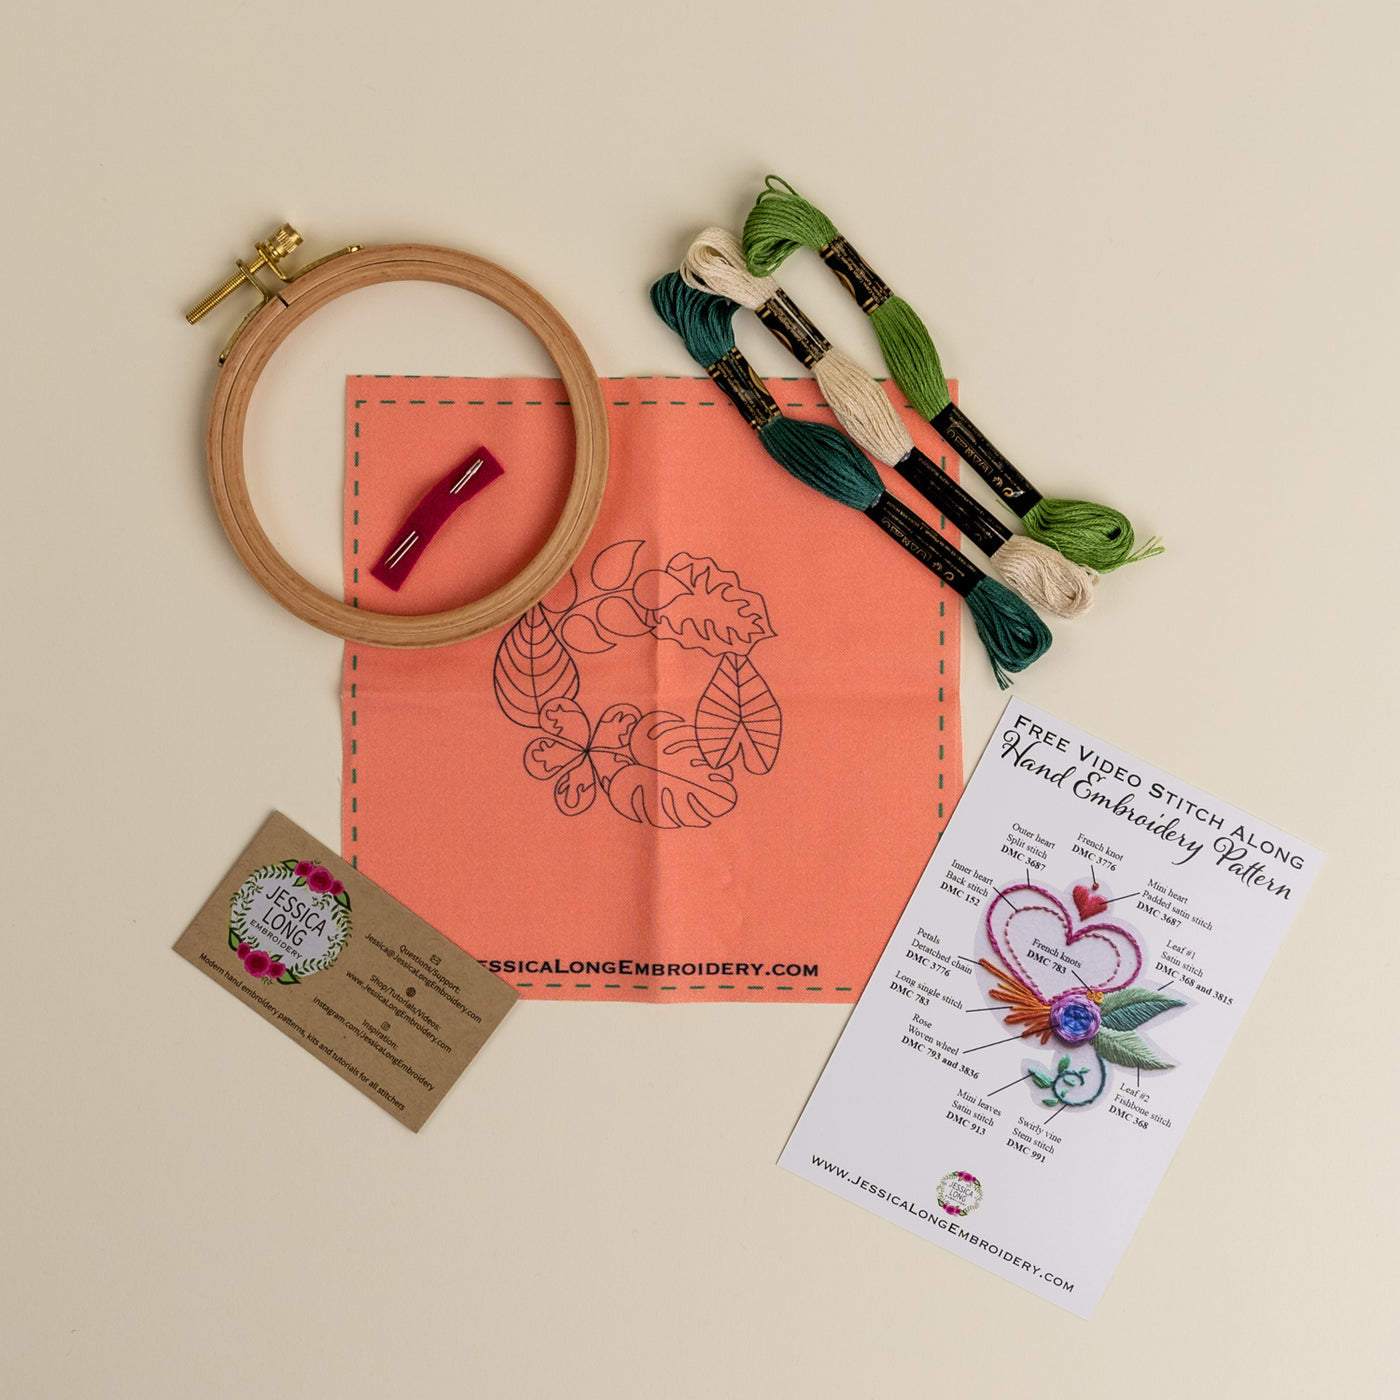 Tropical Plants Beginner Hand Embroidery Kit